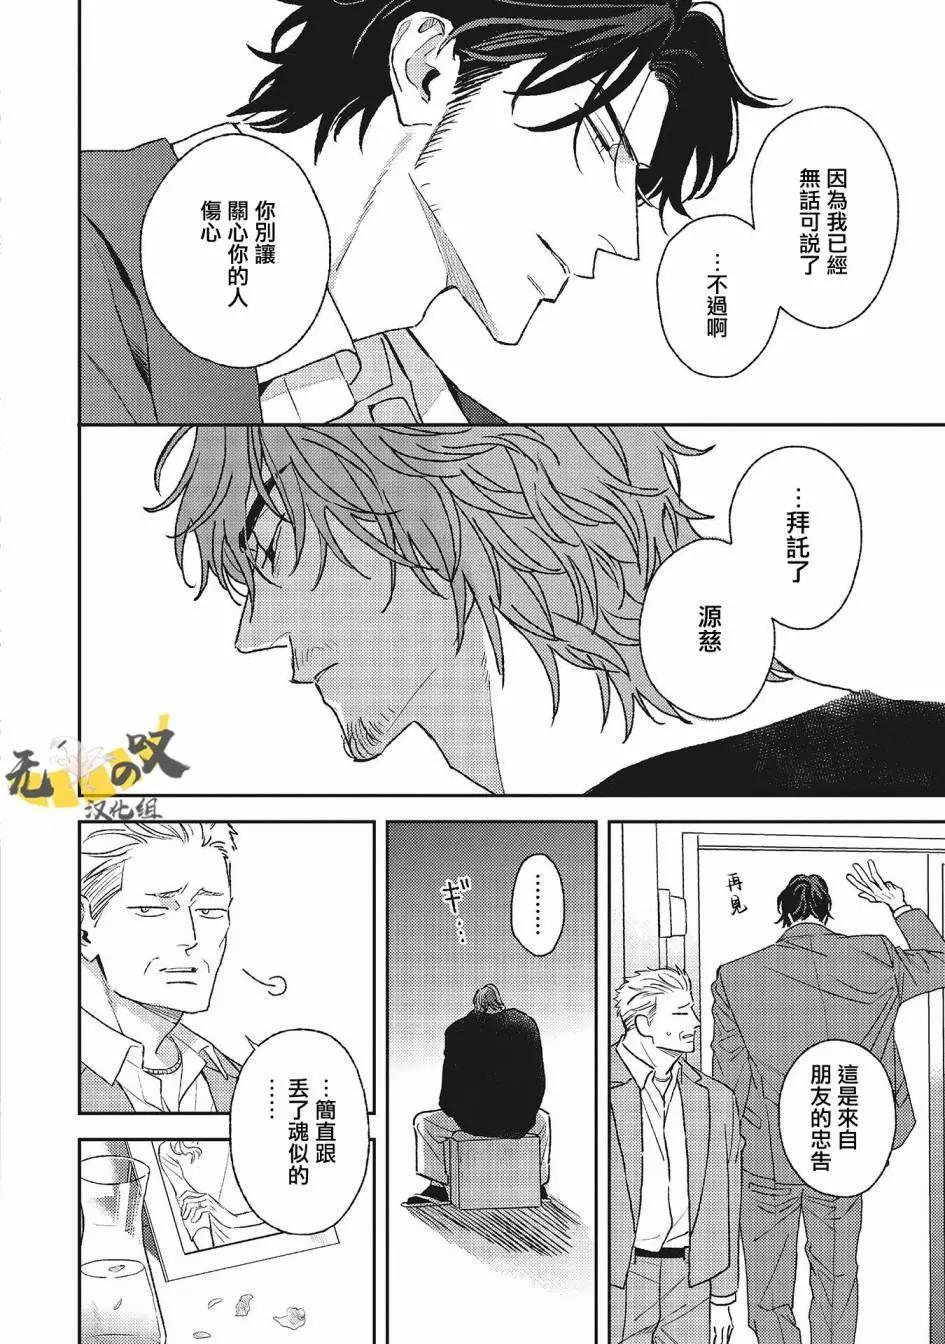 His Little Amber - 第07話 - 4